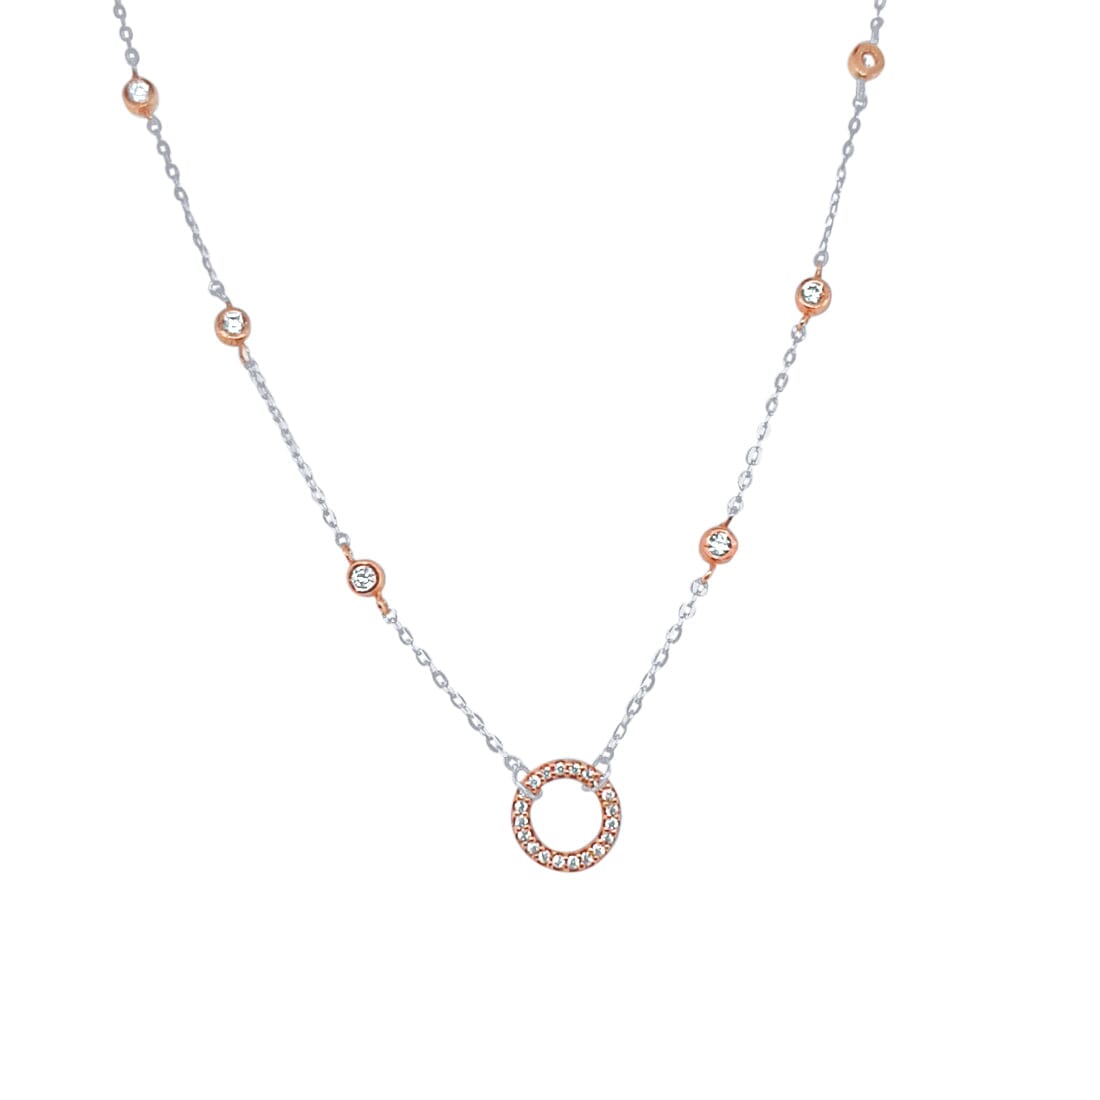 45cm Open Circle Necklace with Cubic Zirconia in Sterling Silver and Rose Tones Necklaces Bevilles 